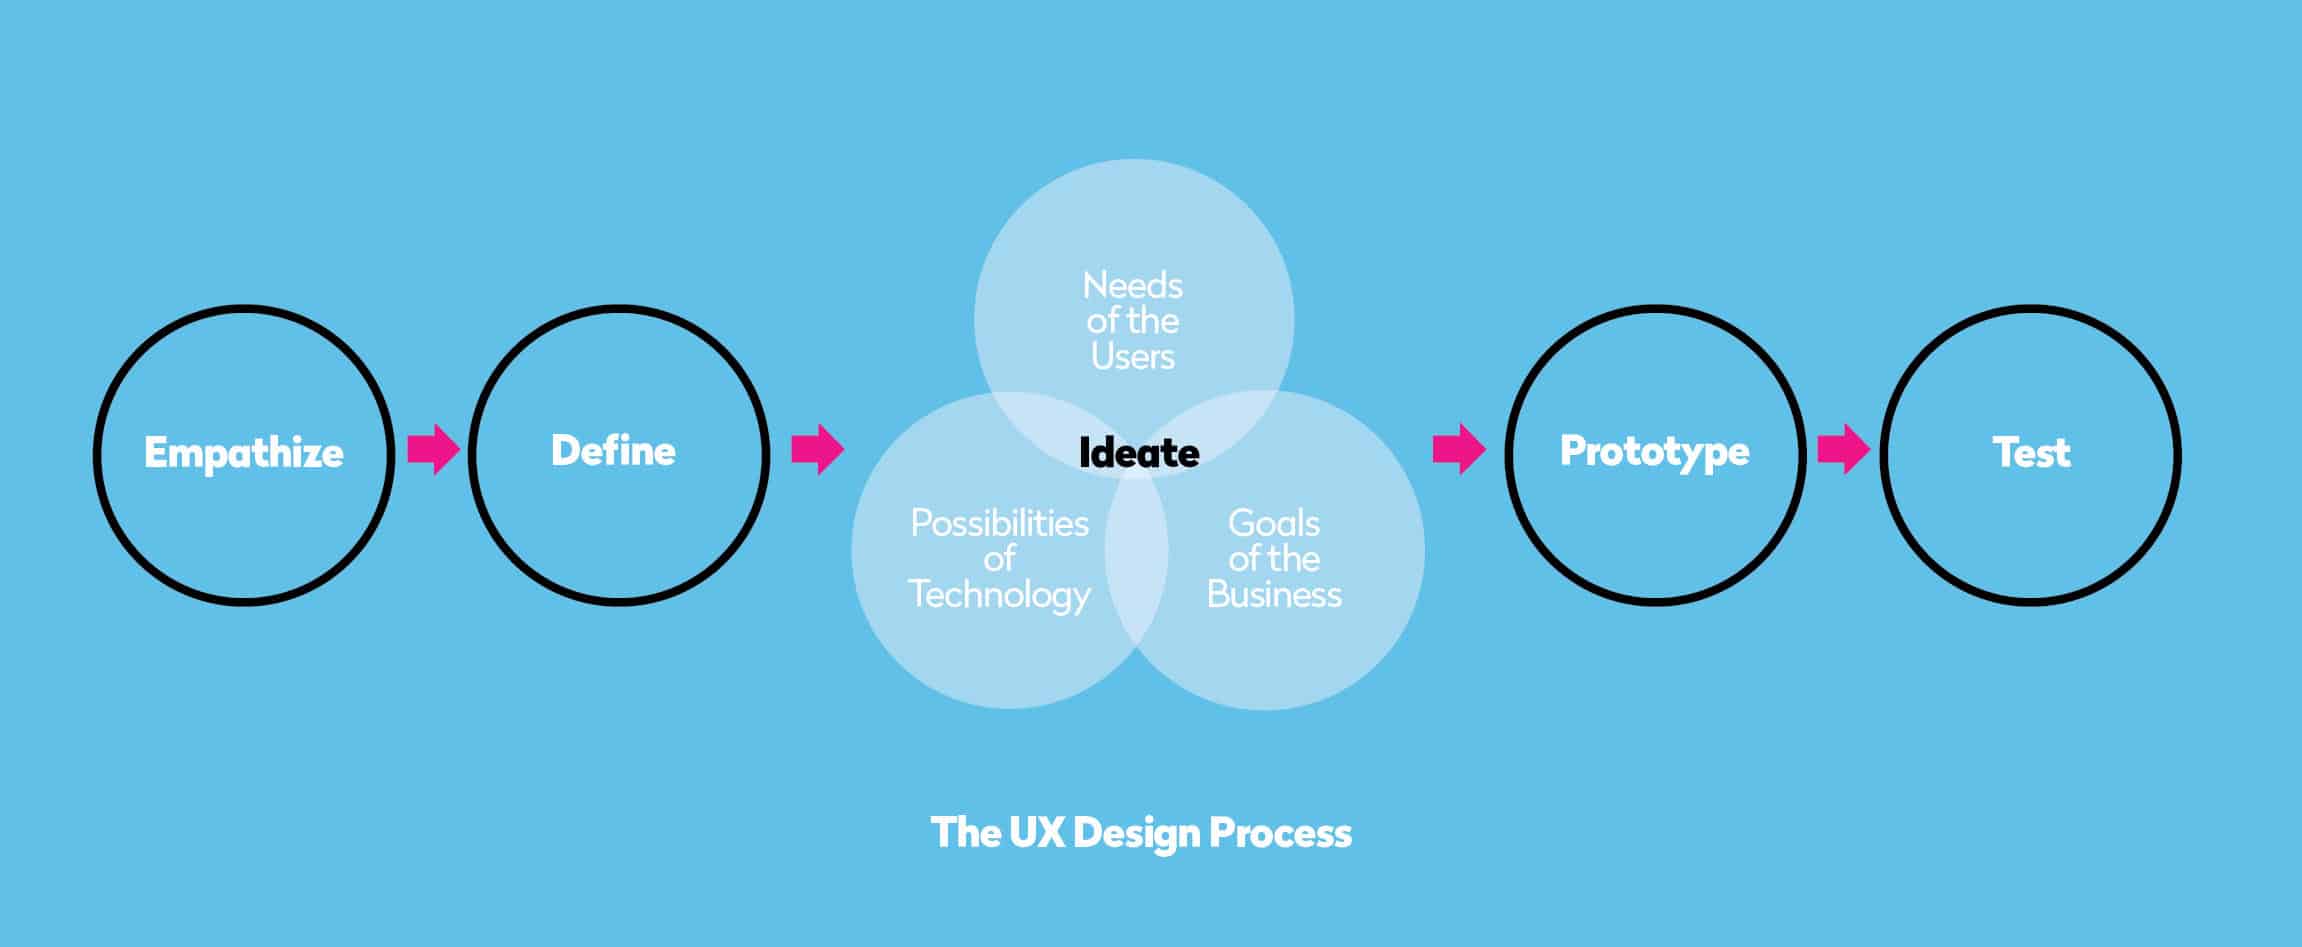 user-experience-design-process-bammboo-growth-hacking